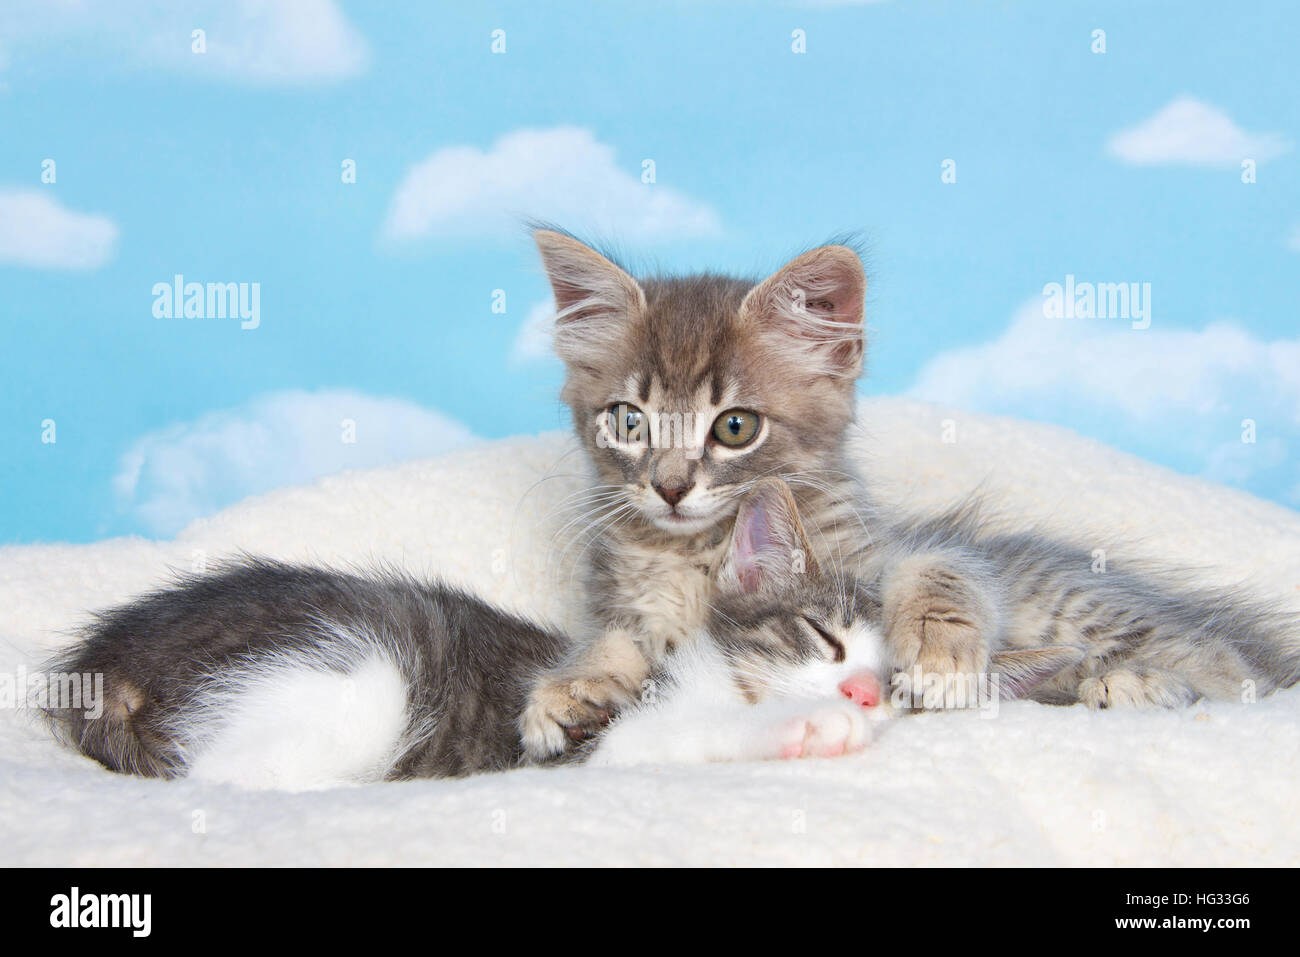 Gray tabby kitten awake, paws holding sibling sleeping on sheep skin blanket with blue background with clouds. copy space above Stock Photo